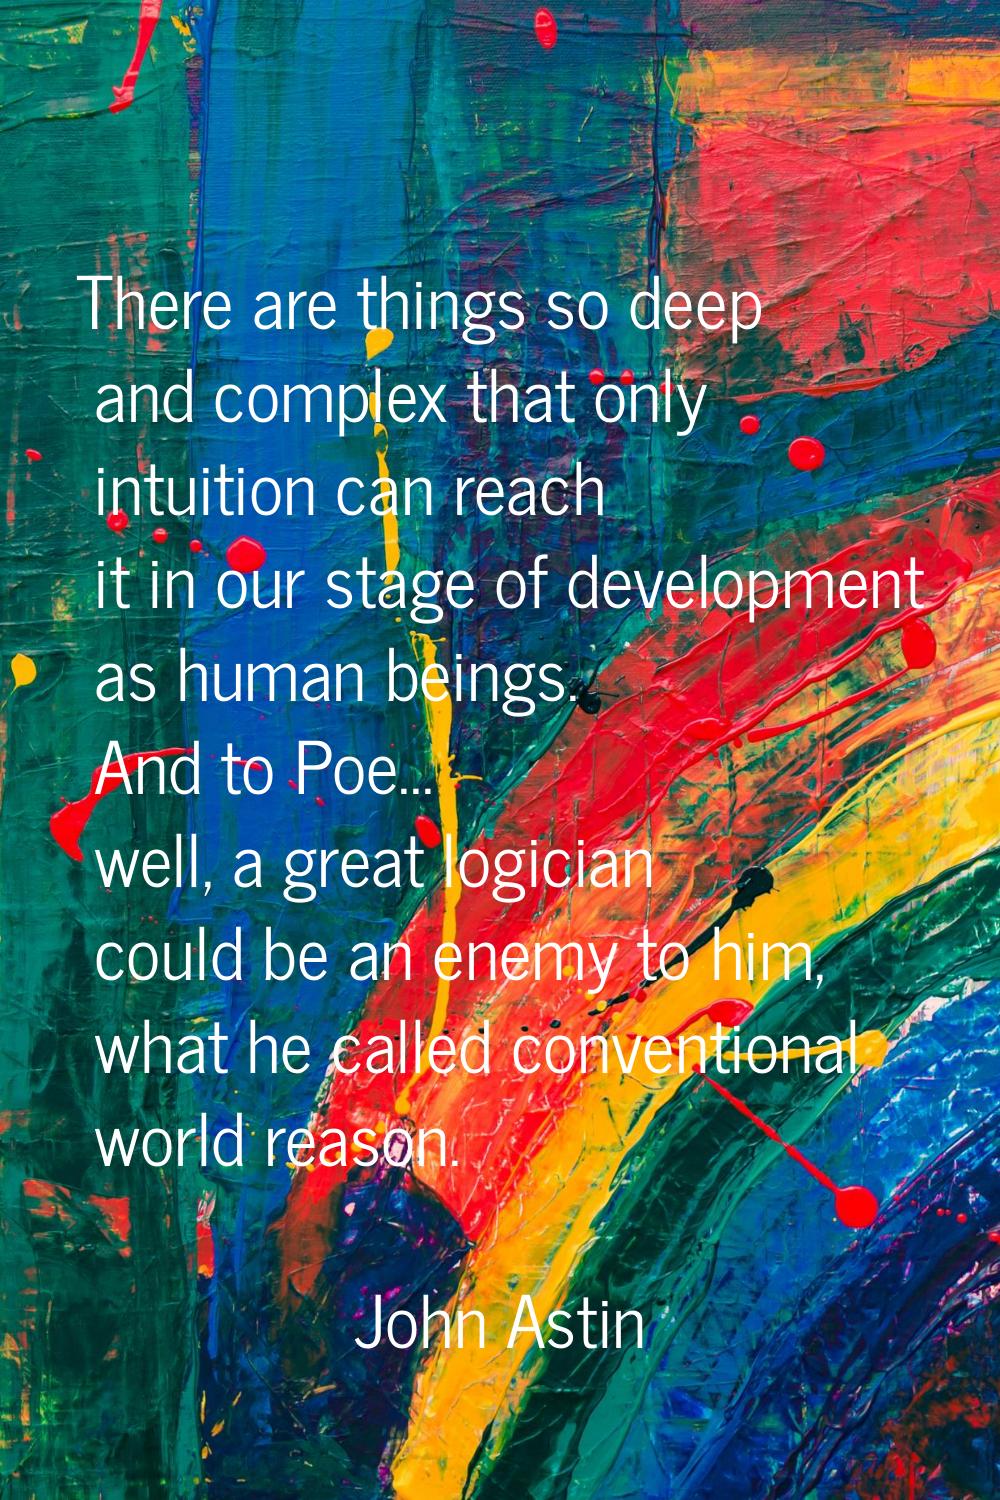 There are things so deep and complex that only intuition can reach it in our stage of development a